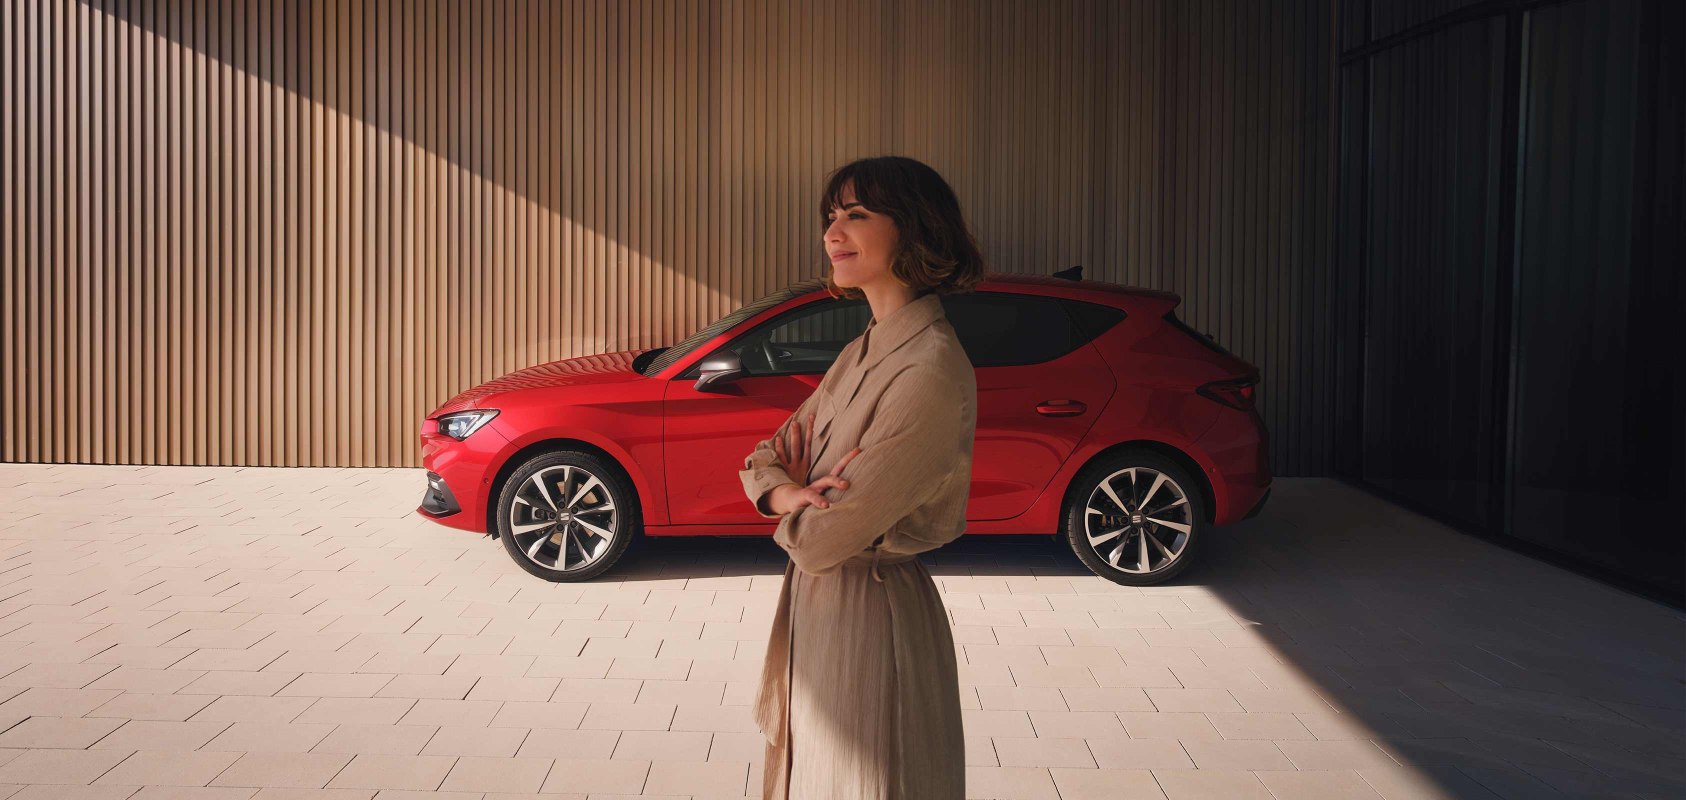 Woman standing close to SEAT Leon 5D desire red colour